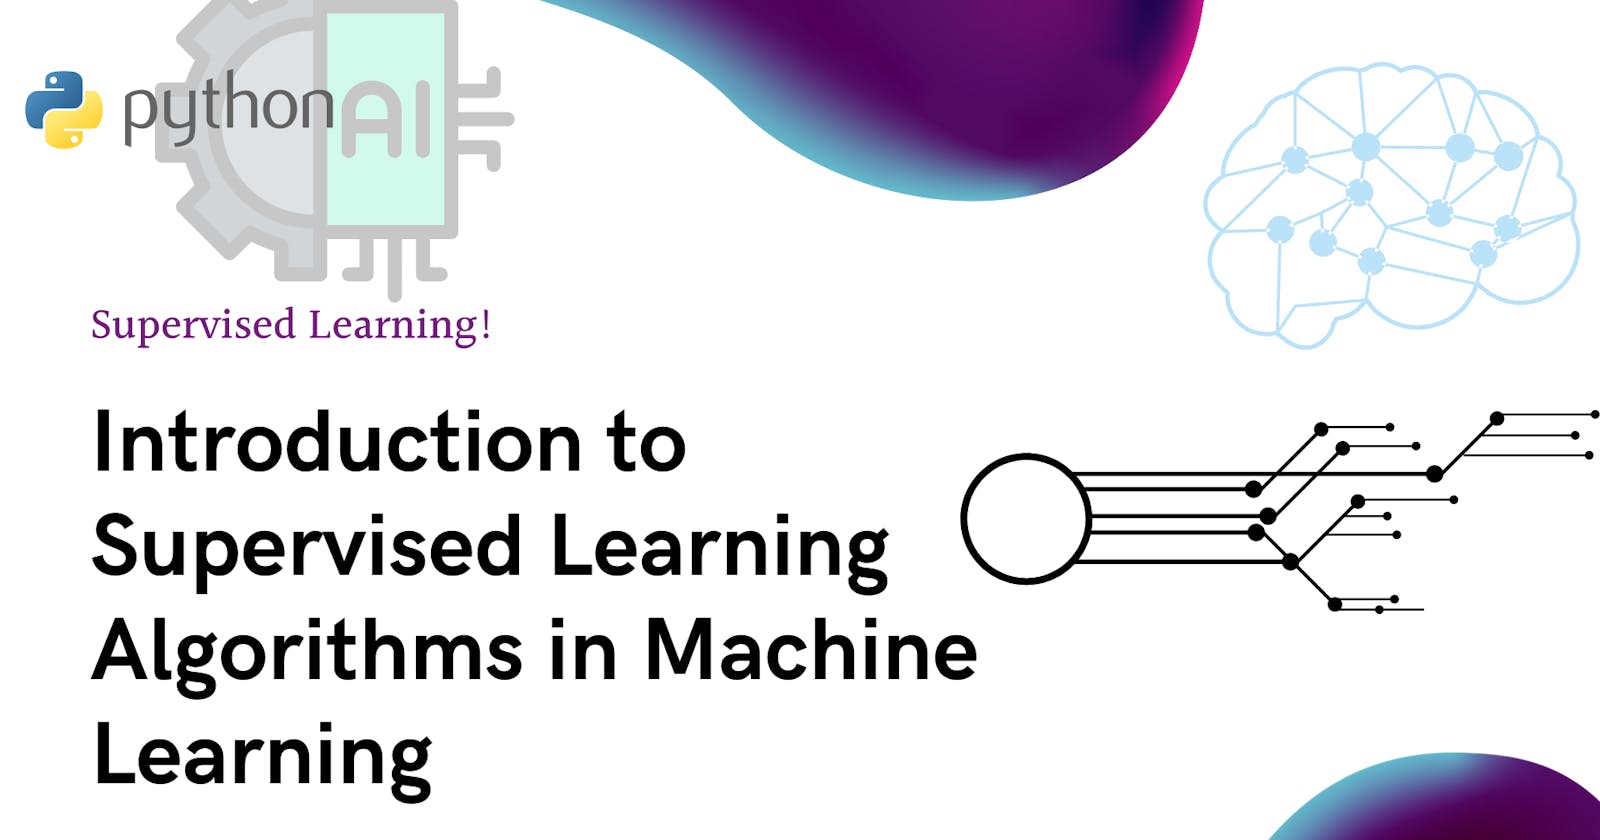 Introduction to Supervised Learning Algorithms in Machine Learning